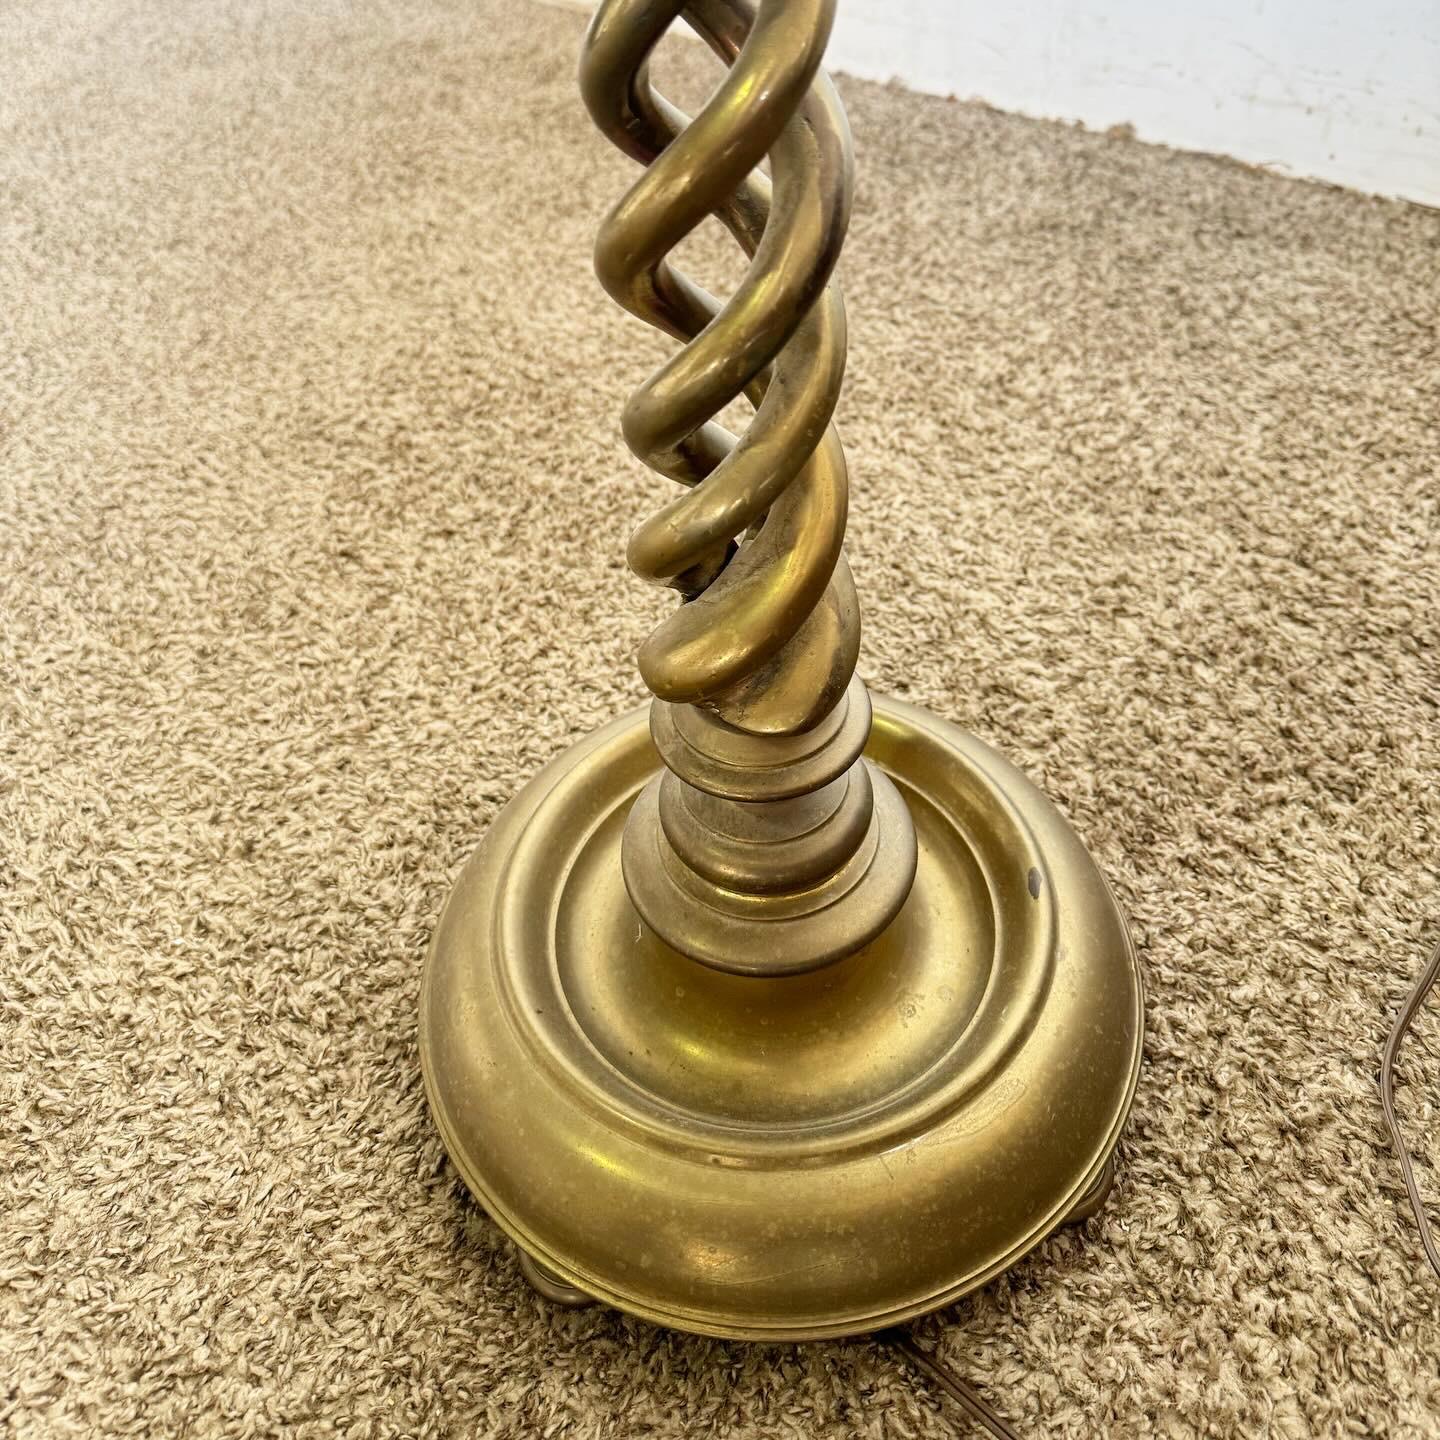 The Vintage English Brass Barley Twist Candle Stick Floor Lamp brings vintage charm and elegance to any setting. Featuring a classic barley twist design in English brass, it adds a warm, golden ambiance. Ideal for reading or as a decorative accent,